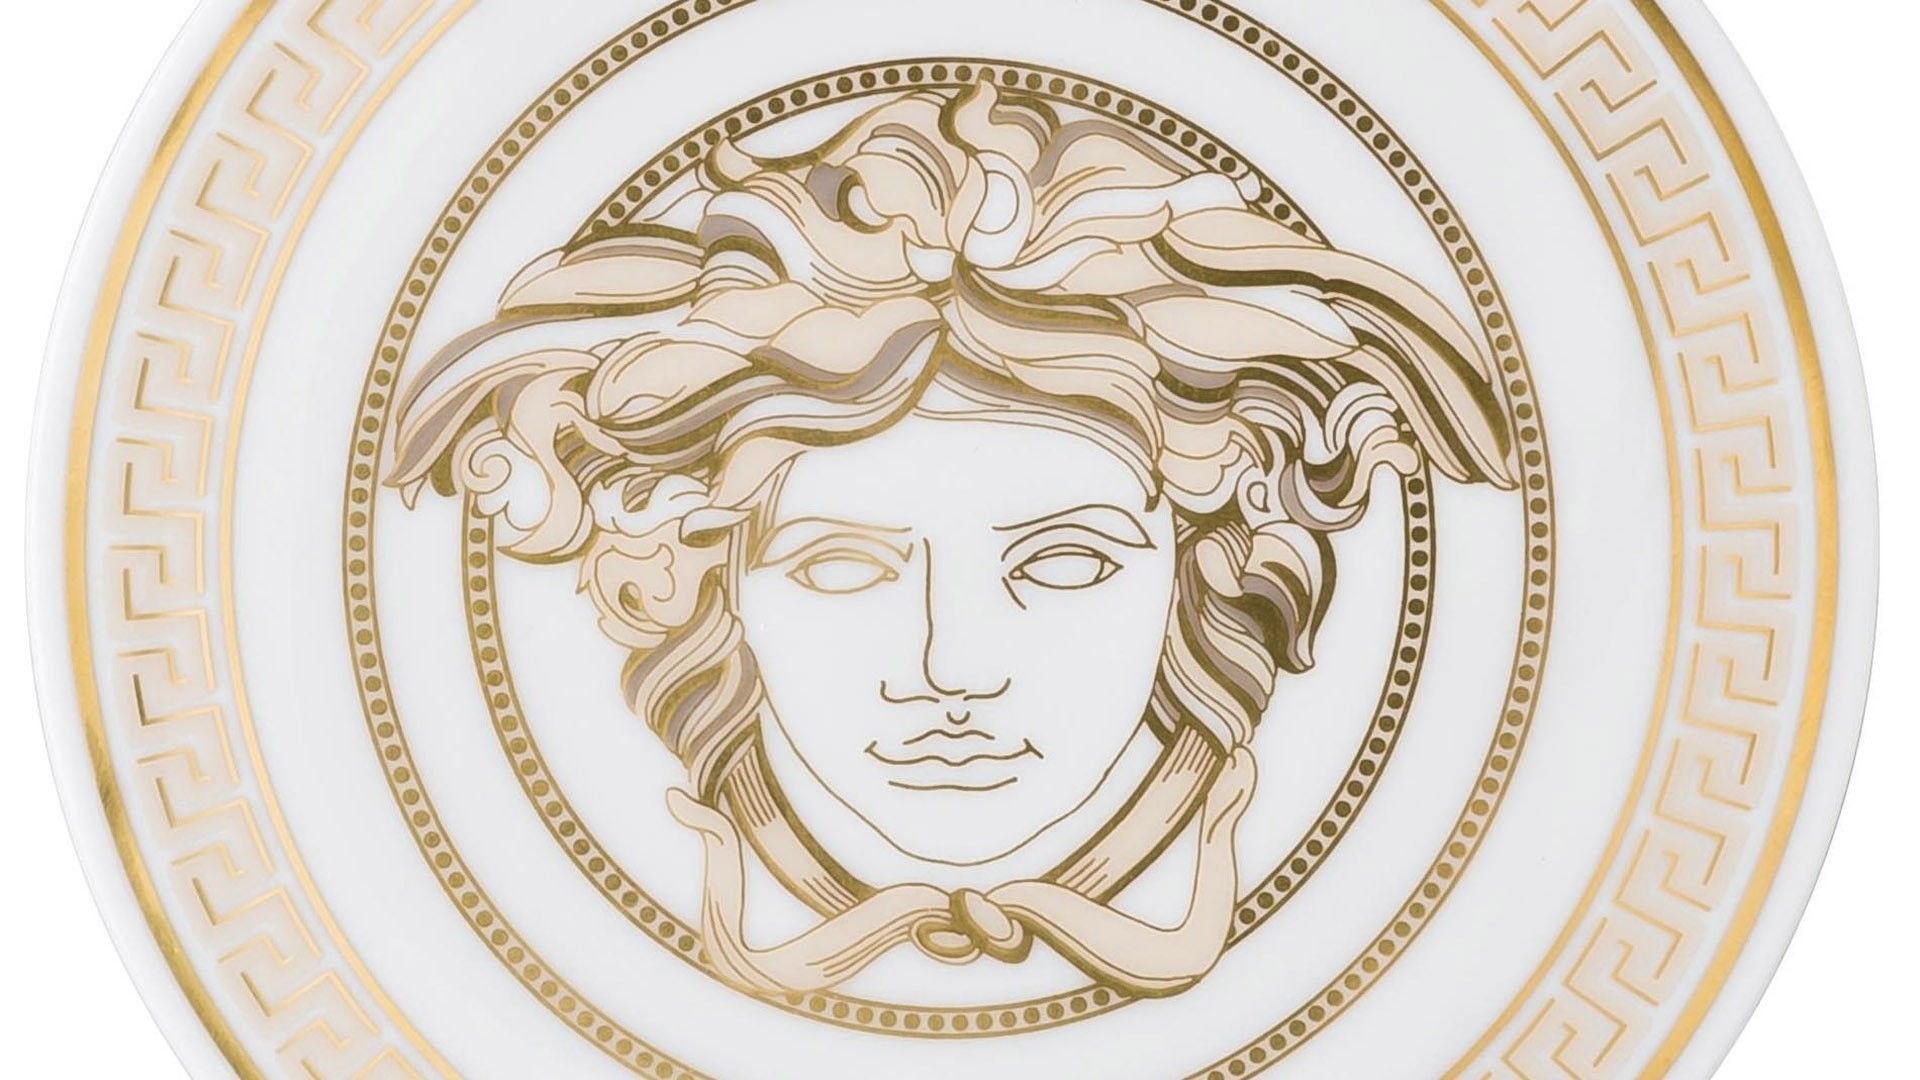 Versace: The iconic logo, Medusa's head, Symbolizing the success of Italian fashion all over the world. 1920x1080 Full HD Wallpaper.